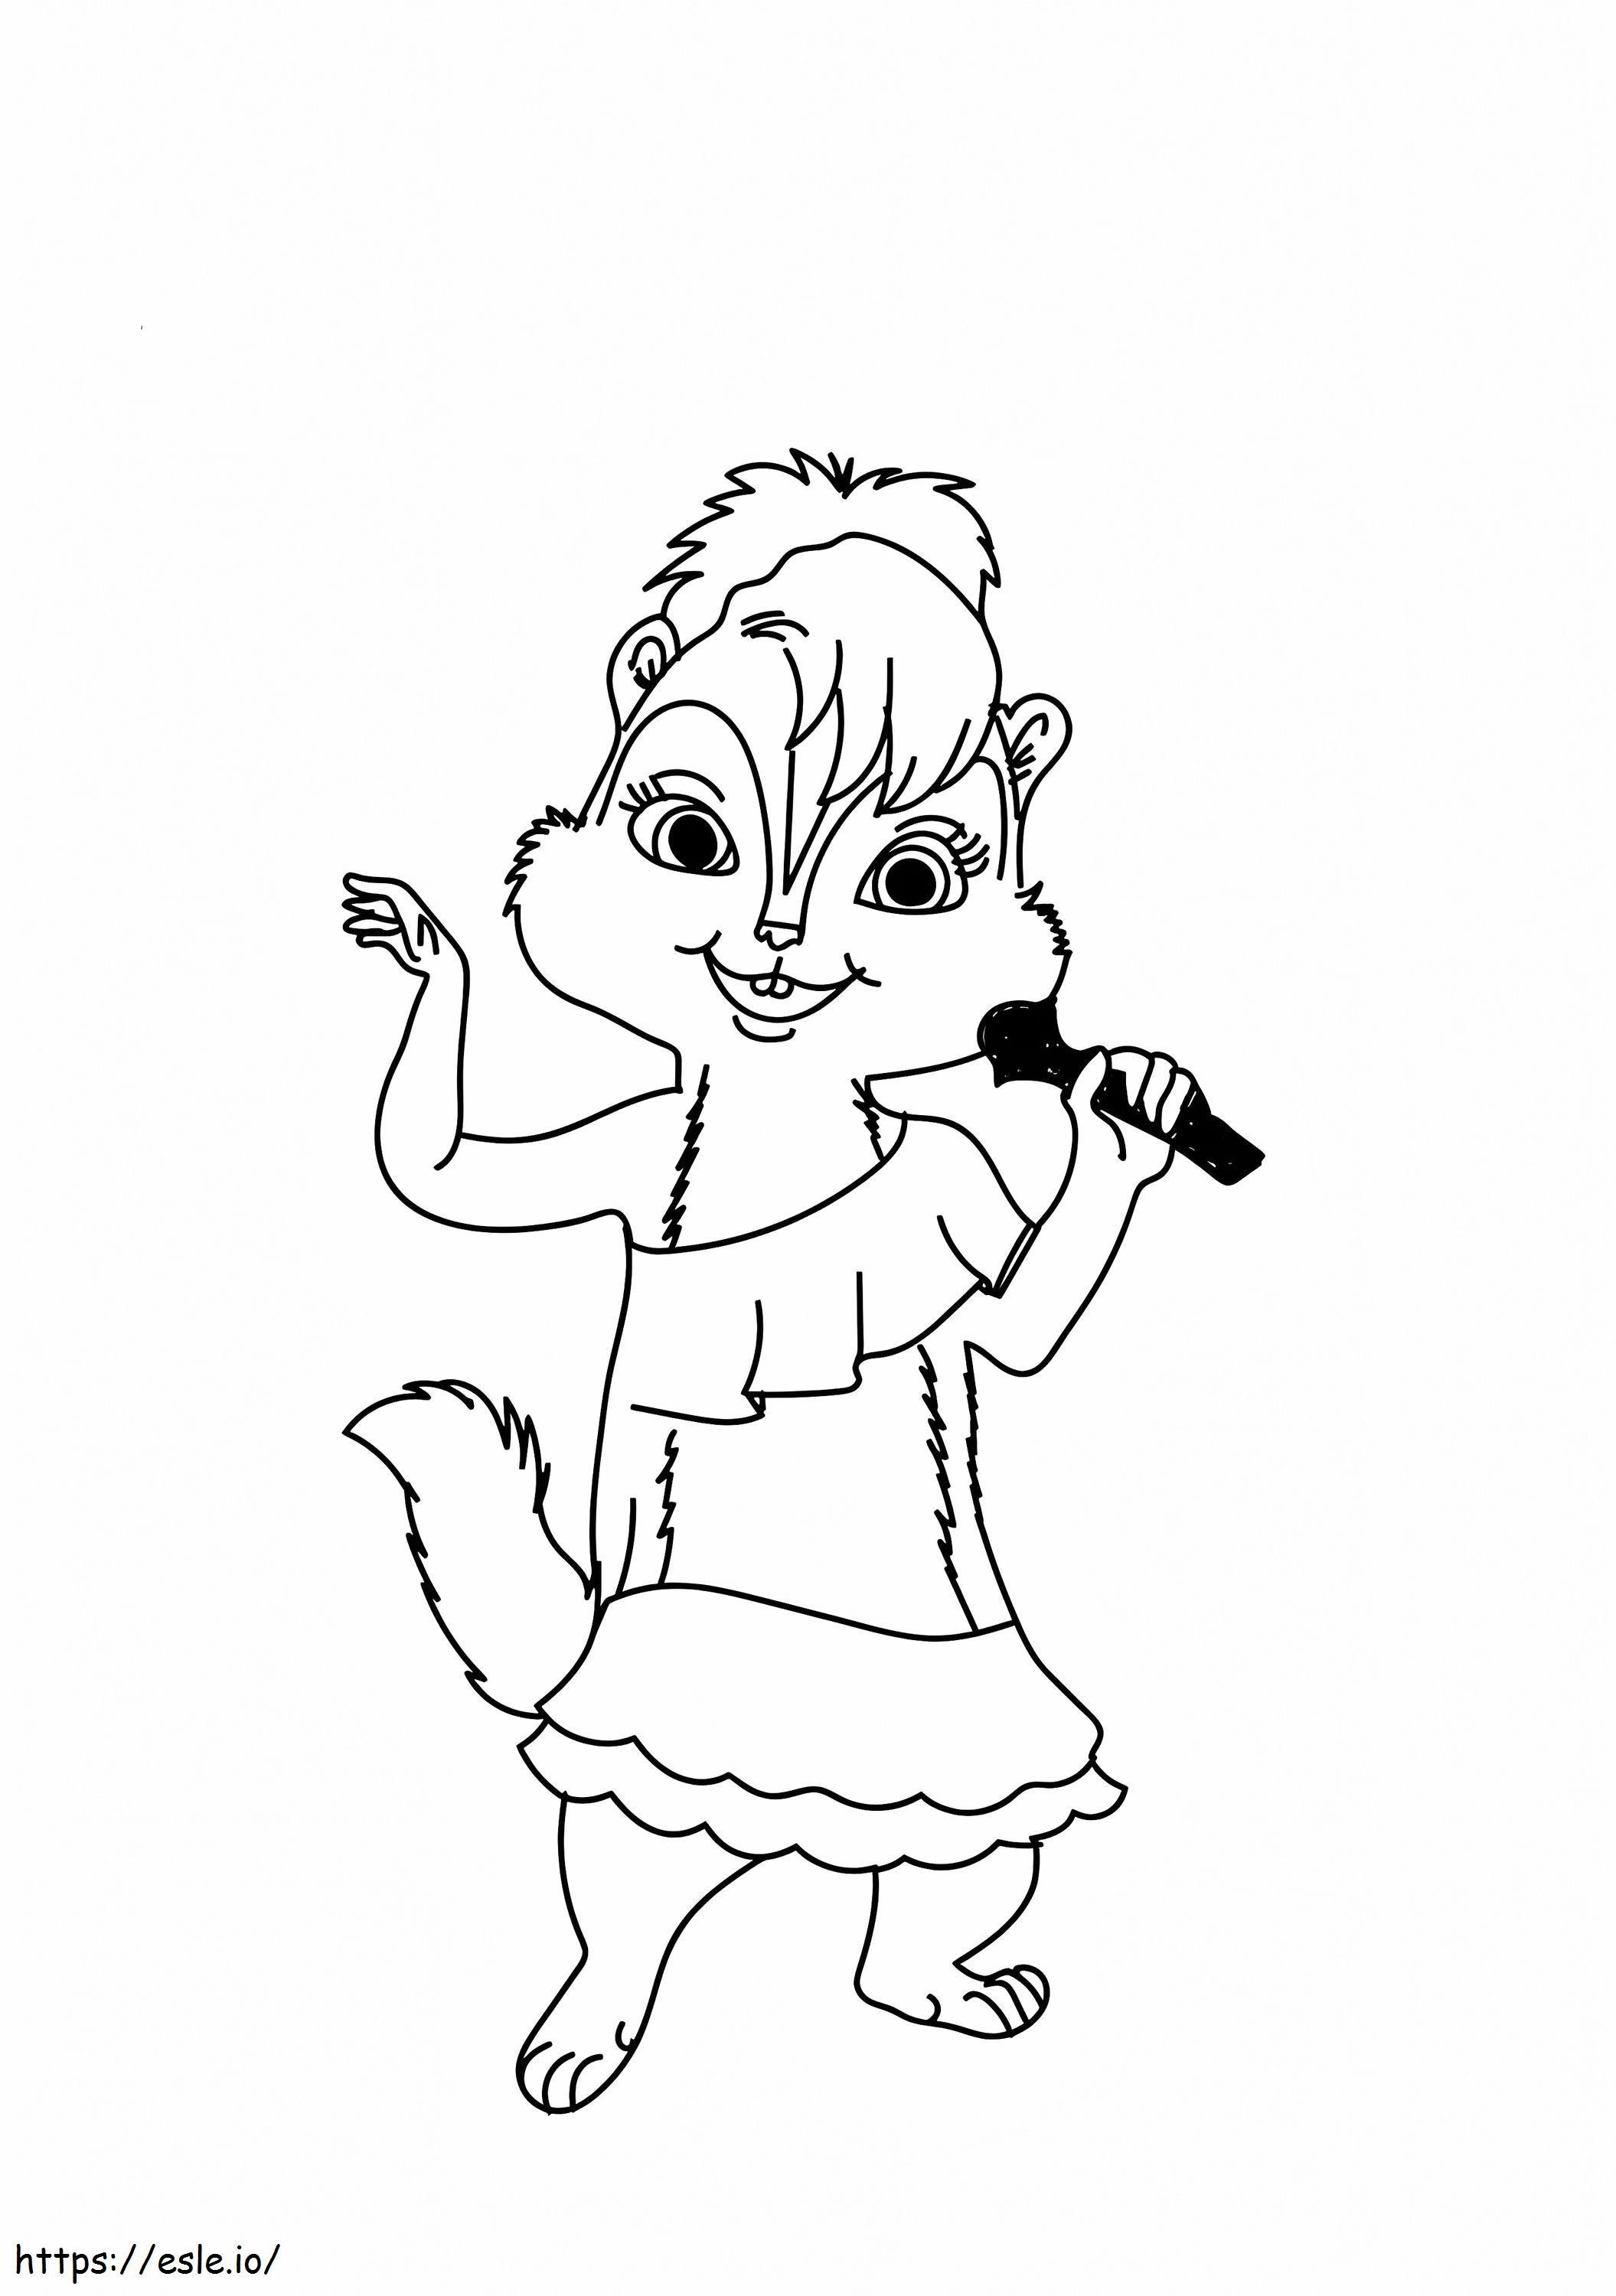 The Jeanette Miller 16 A4 coloring page